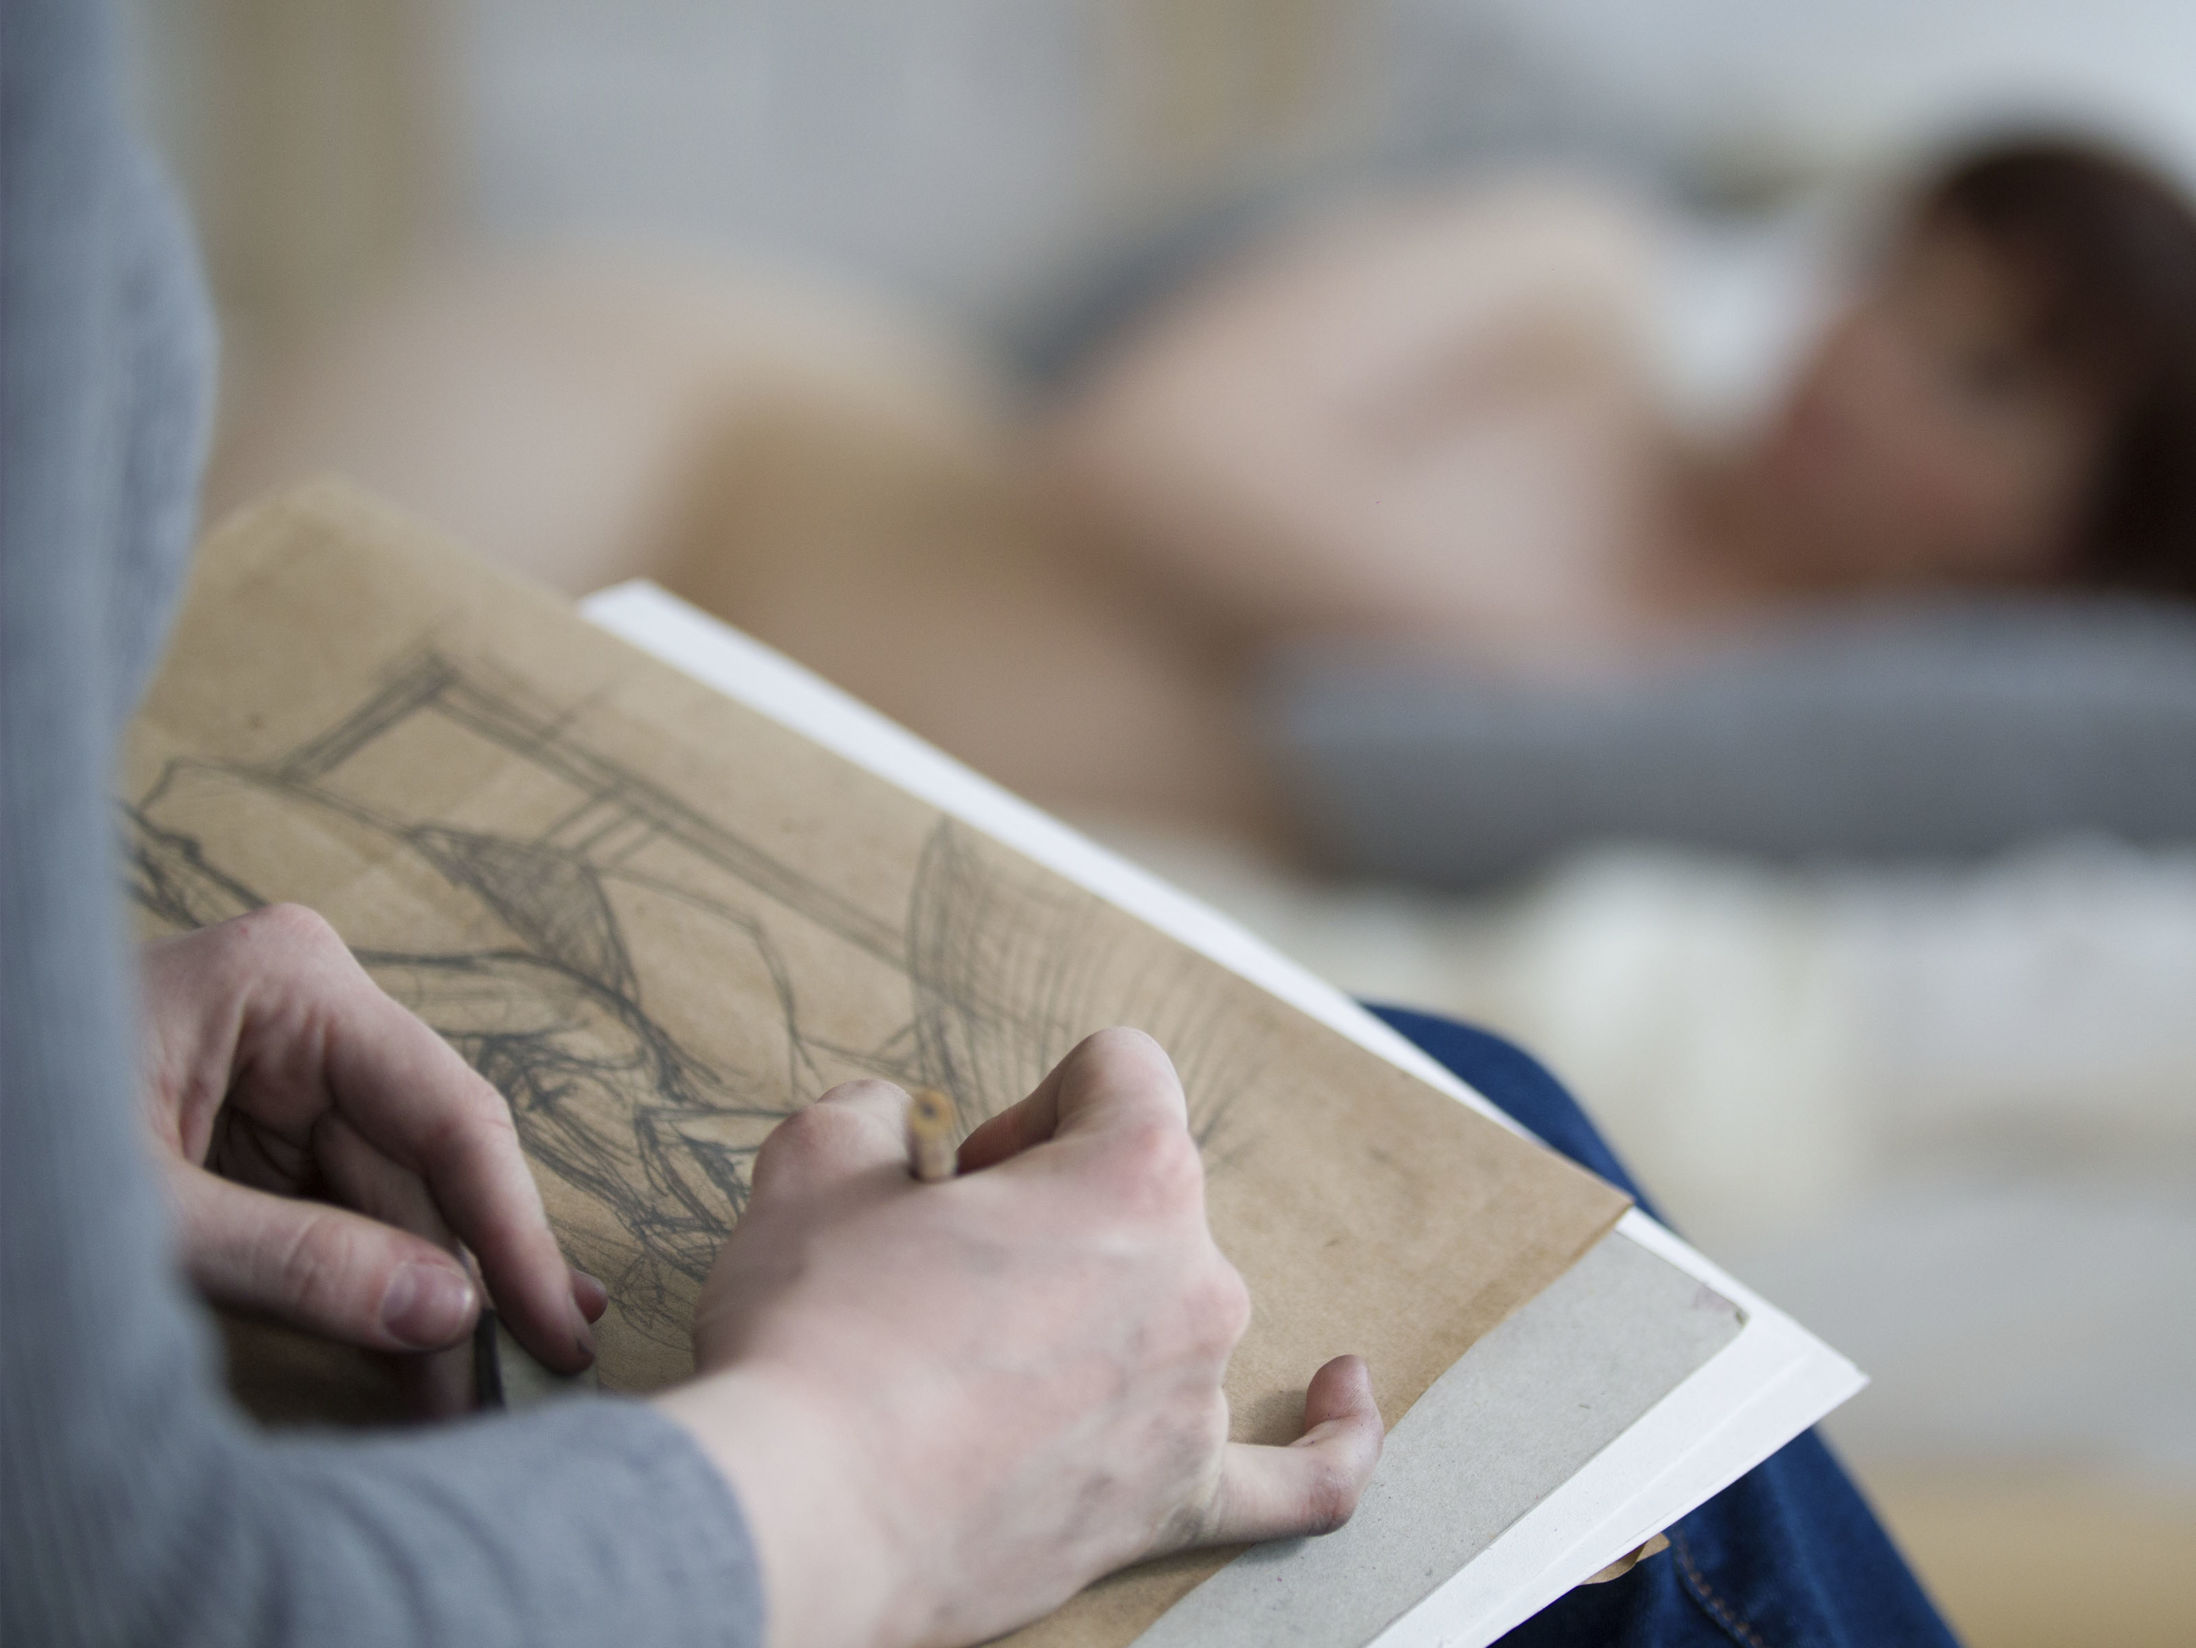 Life Drawing Art Venue Classes in Manchester - Nexus Art Cafe